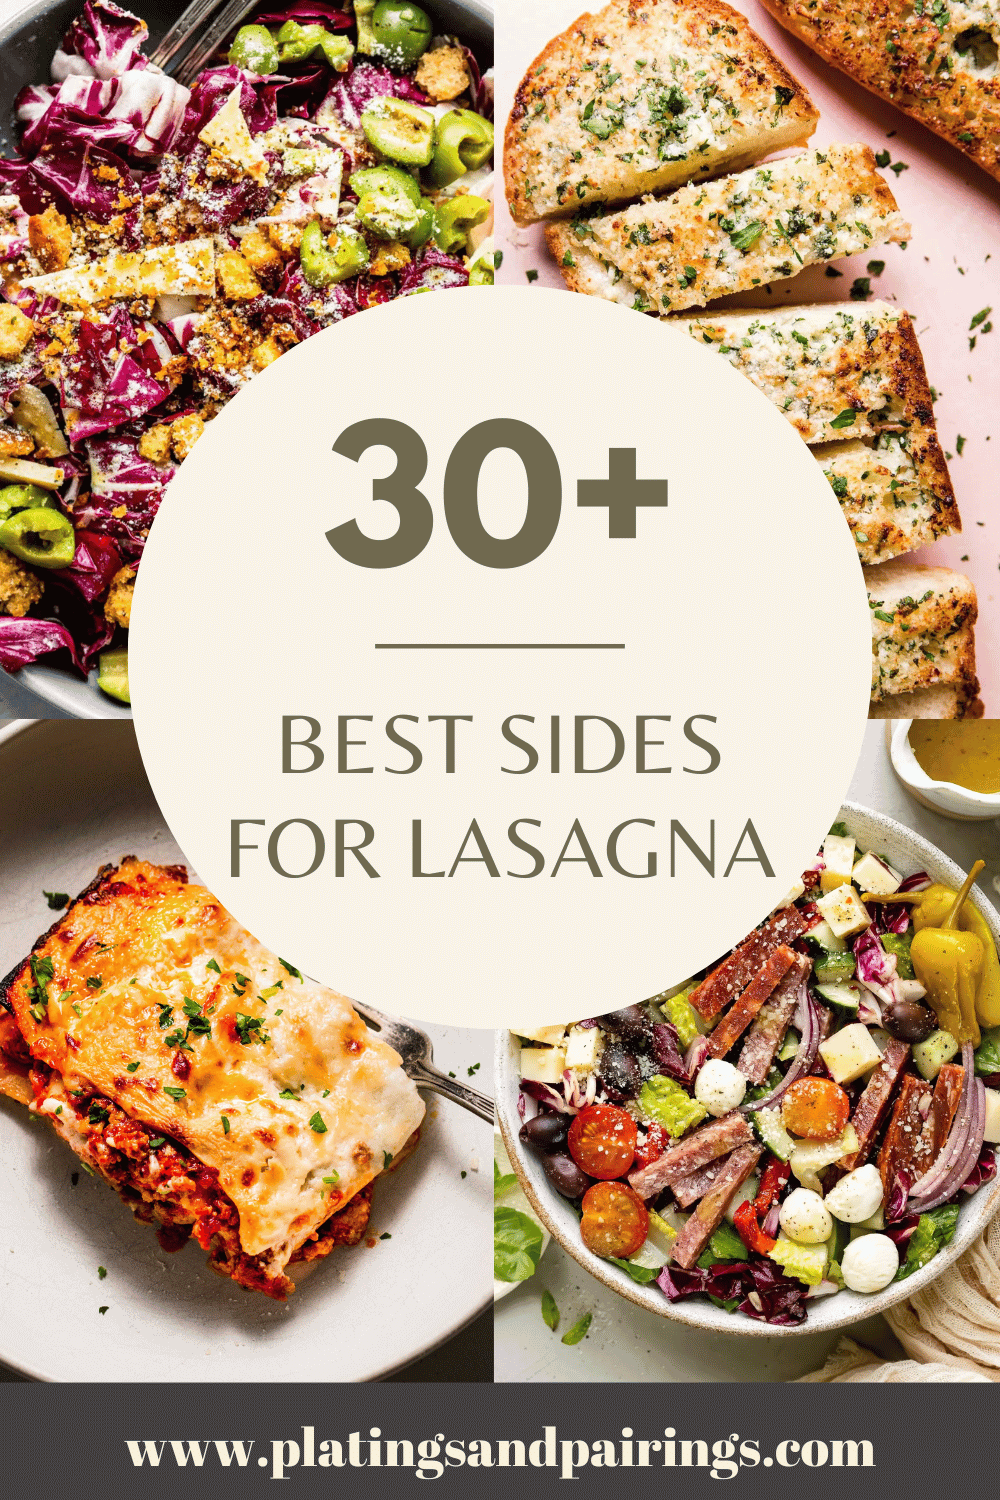 Collage of side dishes for lasagna with text overlay - best sides for lasagna.